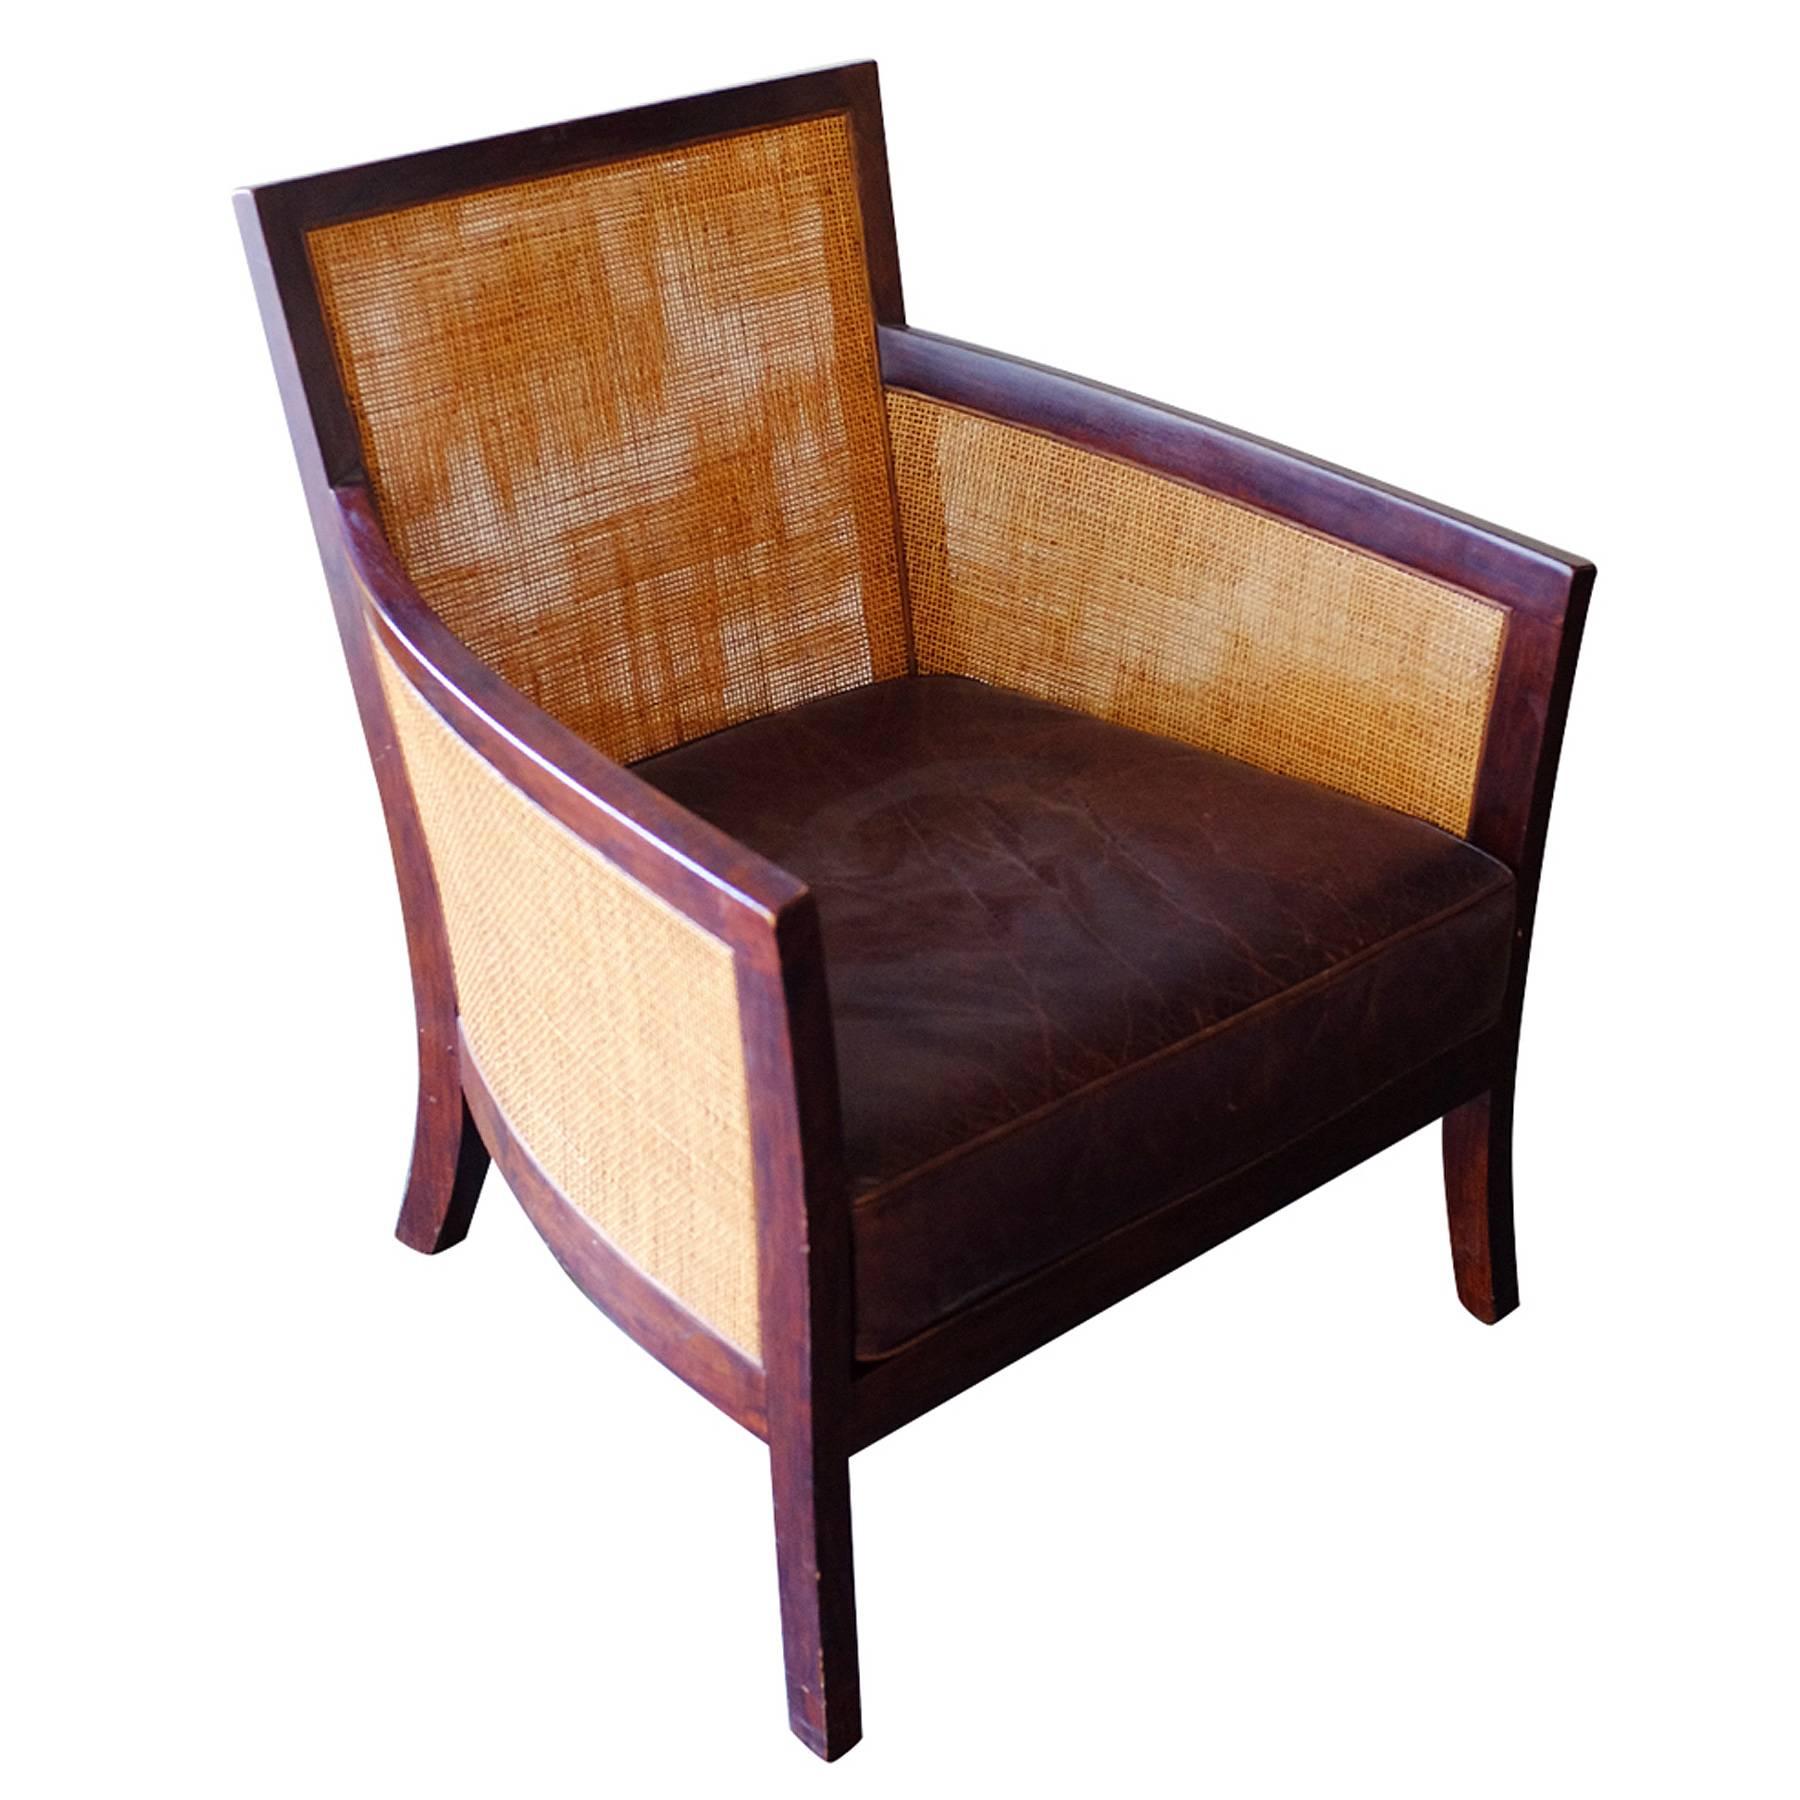 Contemporary dark stained wicker lounge chair with velvet seat.